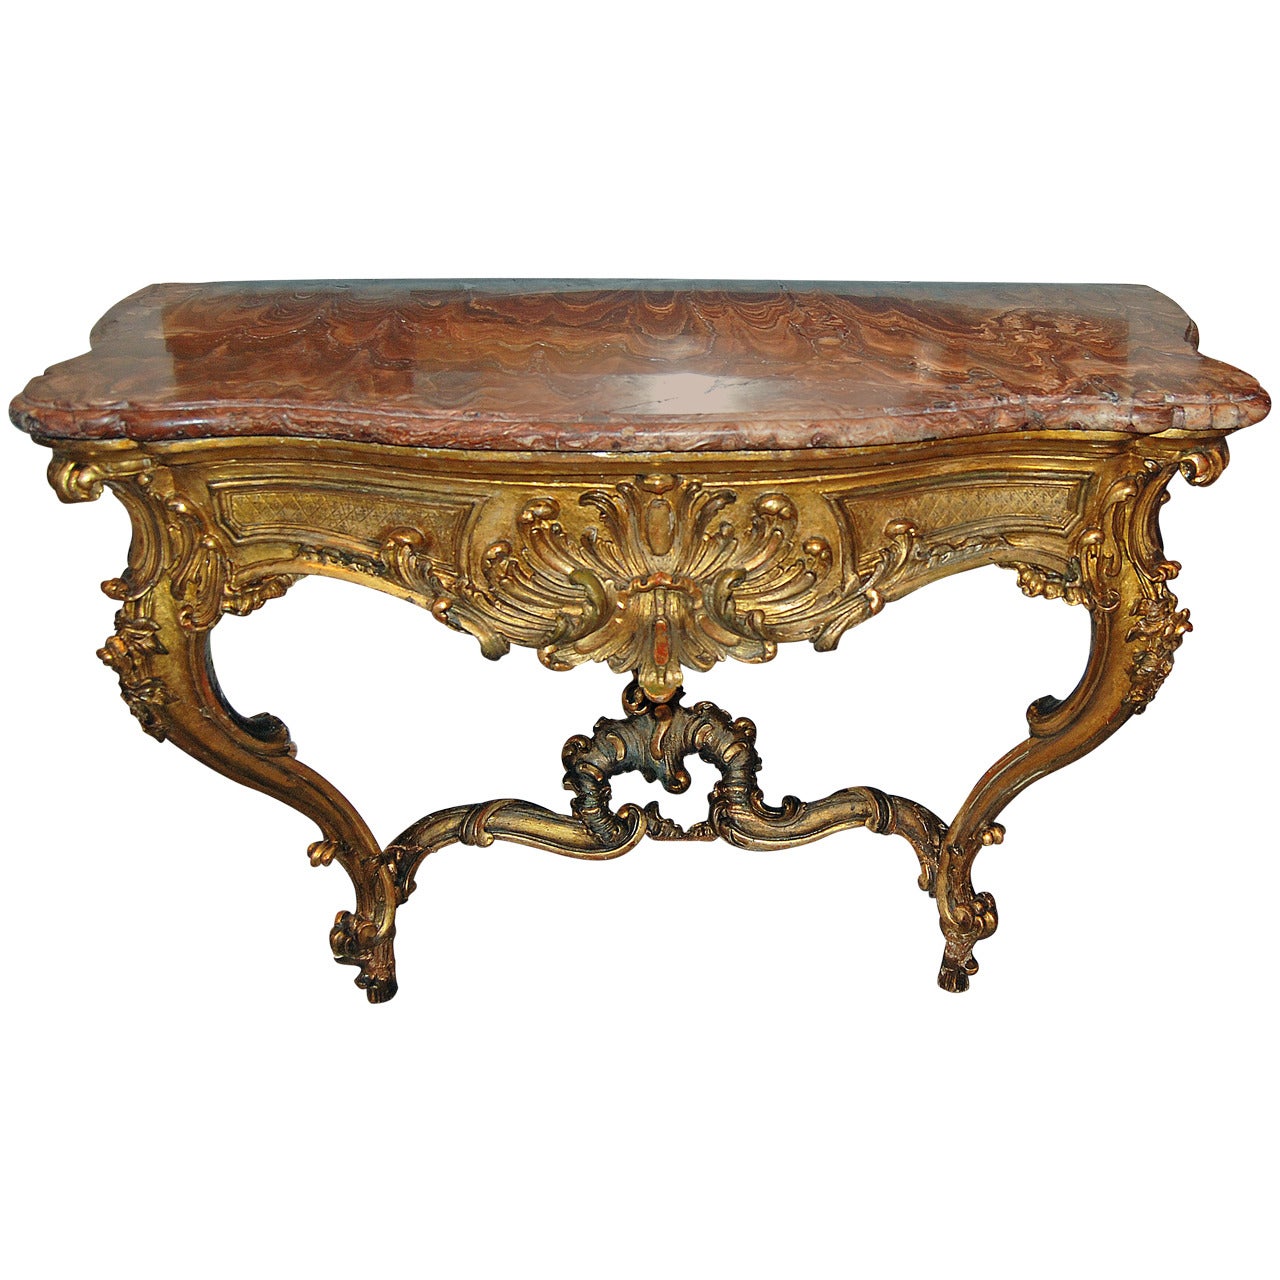 Period Louis XV Giltwood Console